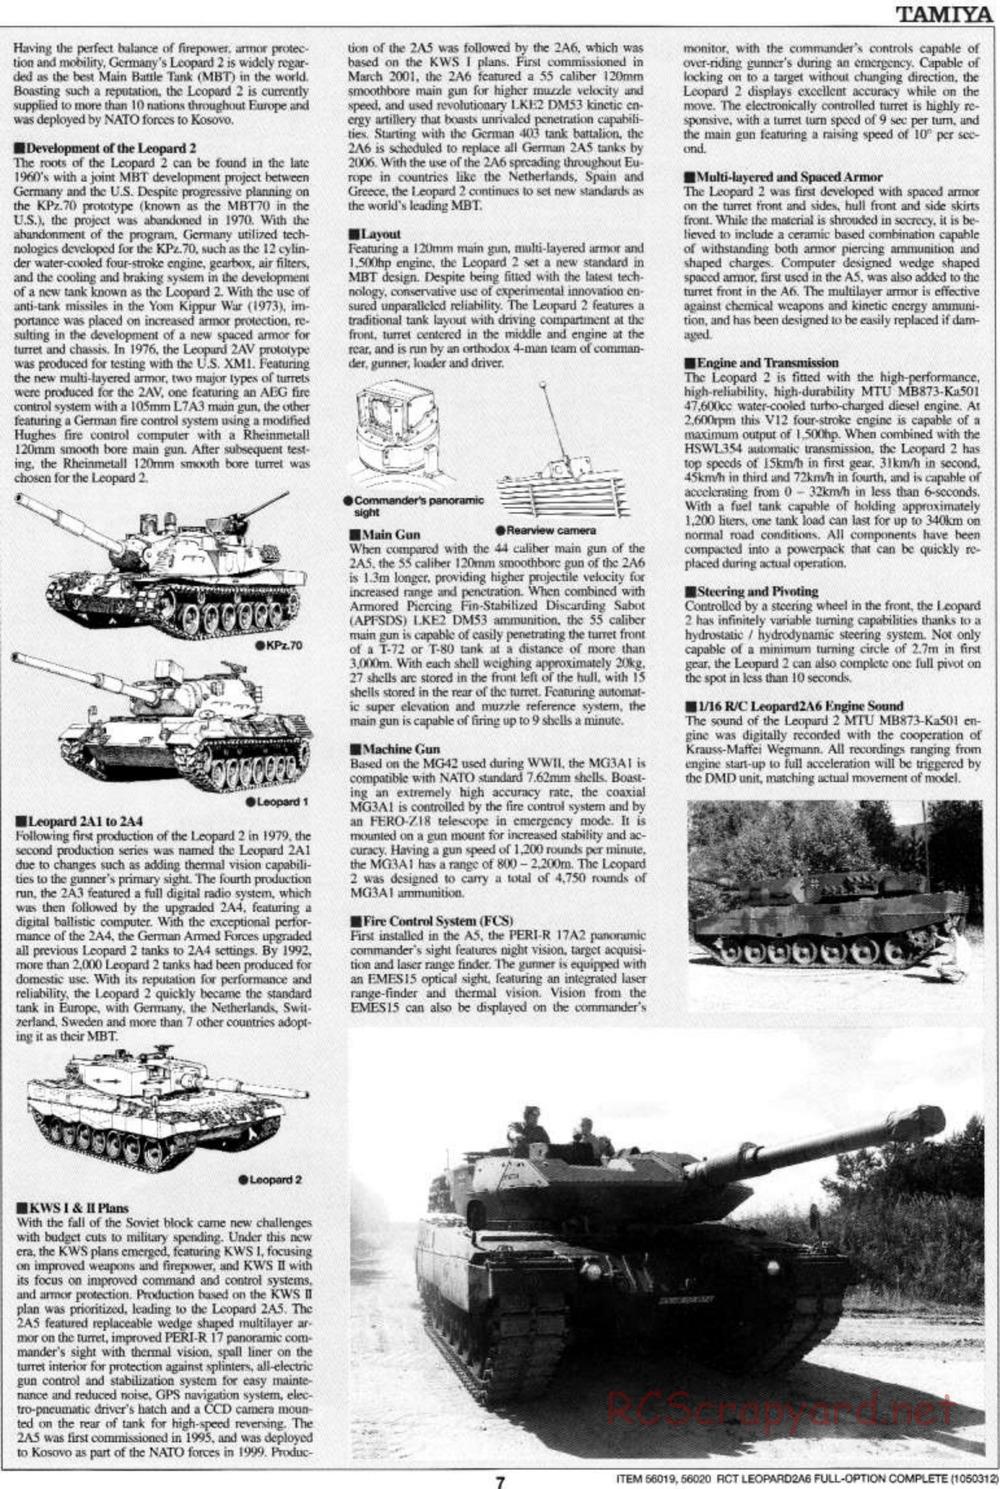 Tamiya - Leopard 2 A6 - 1/16 Scale Chassis - Manual - Page 7